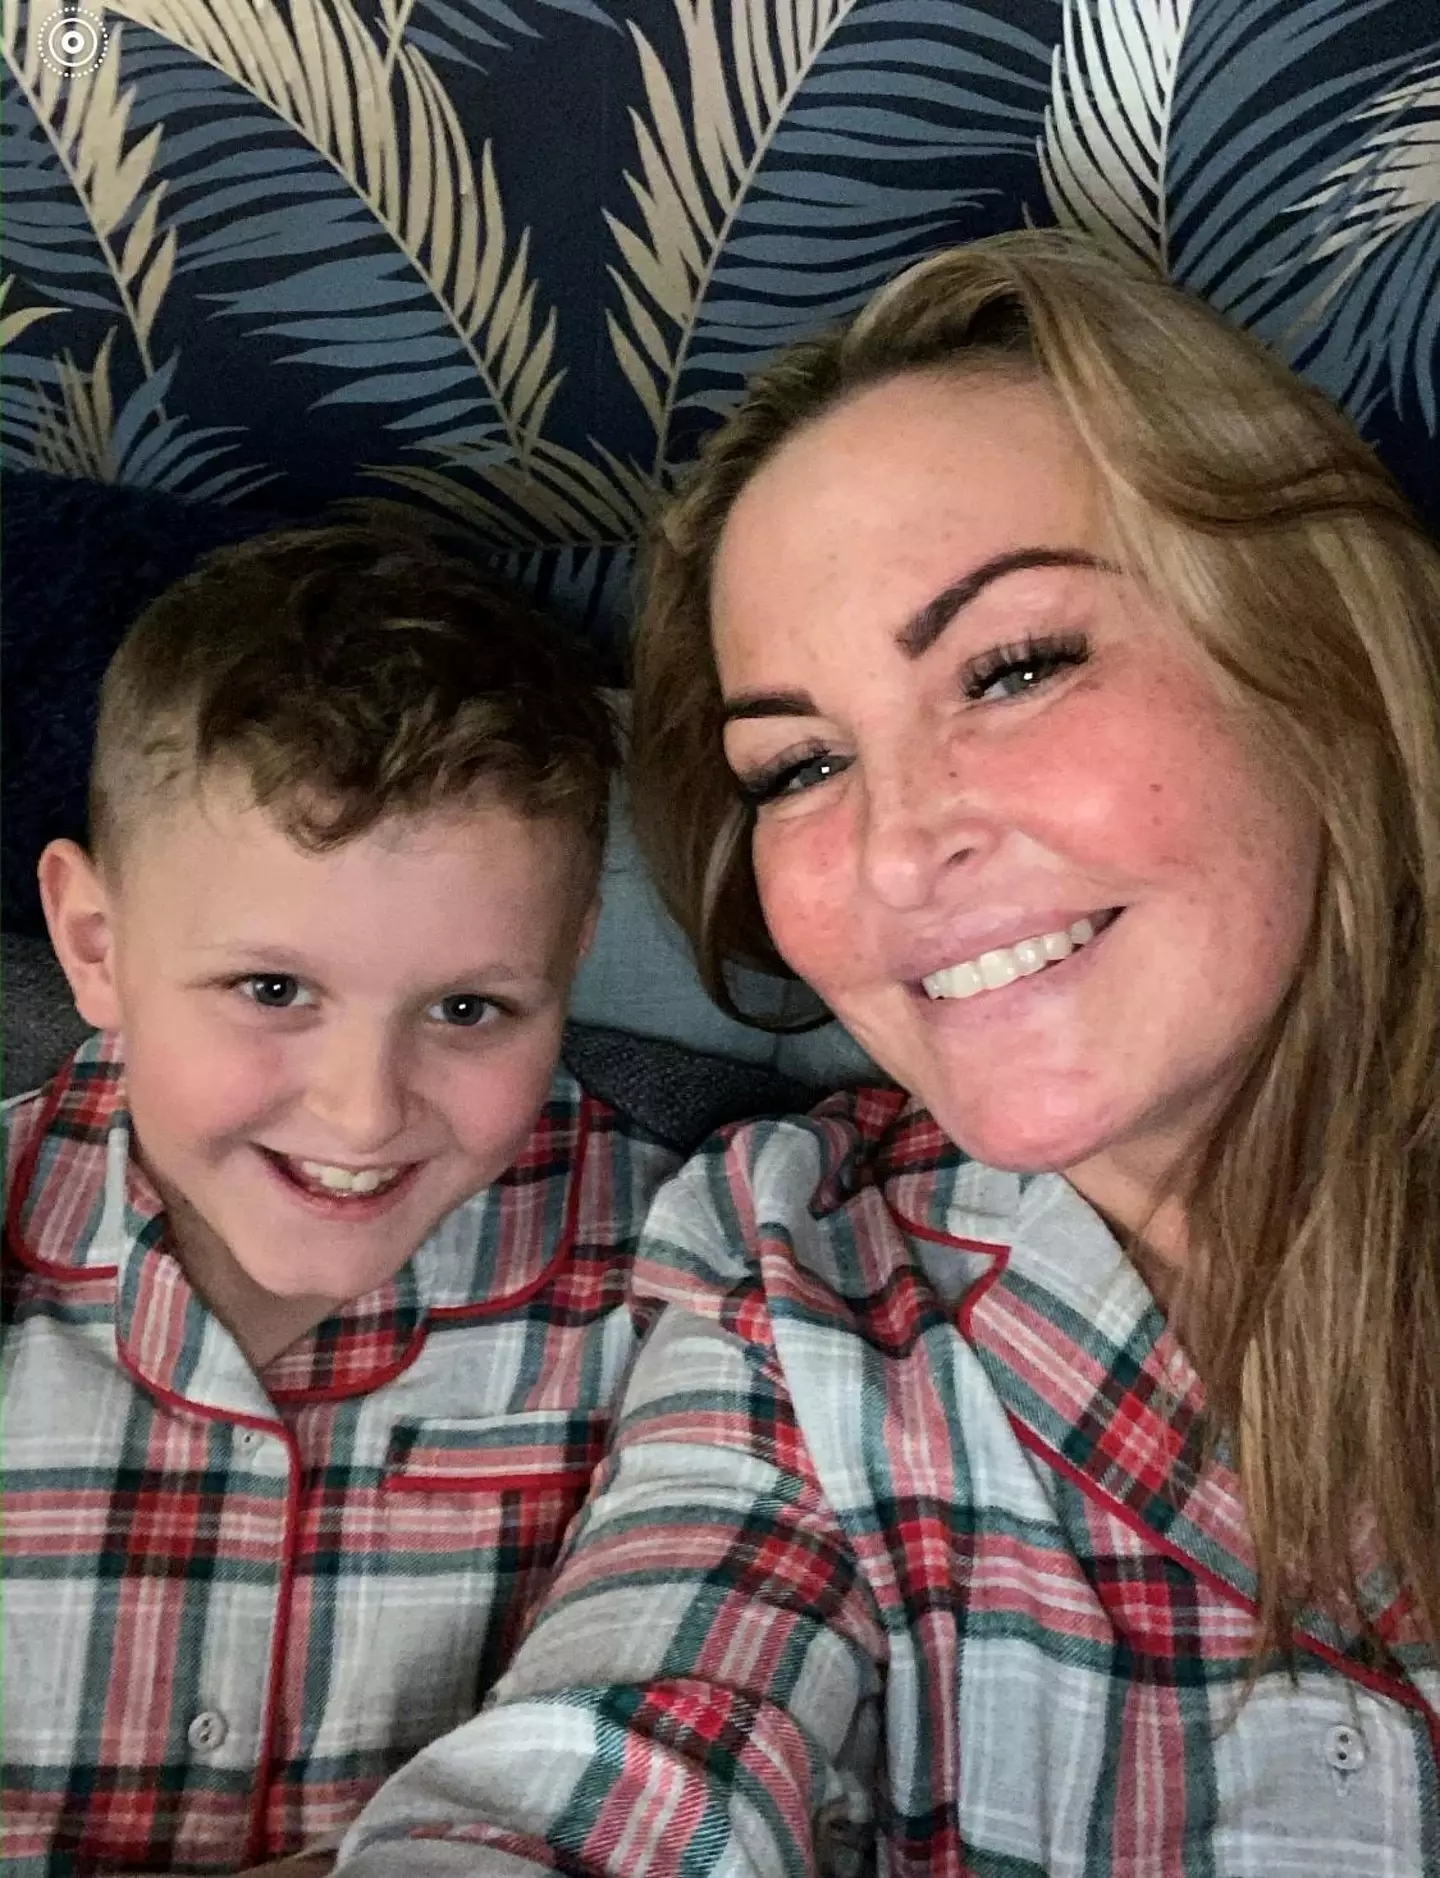 Mum Melanie is trying to raise £100,000 to take her son to the US for treatment.